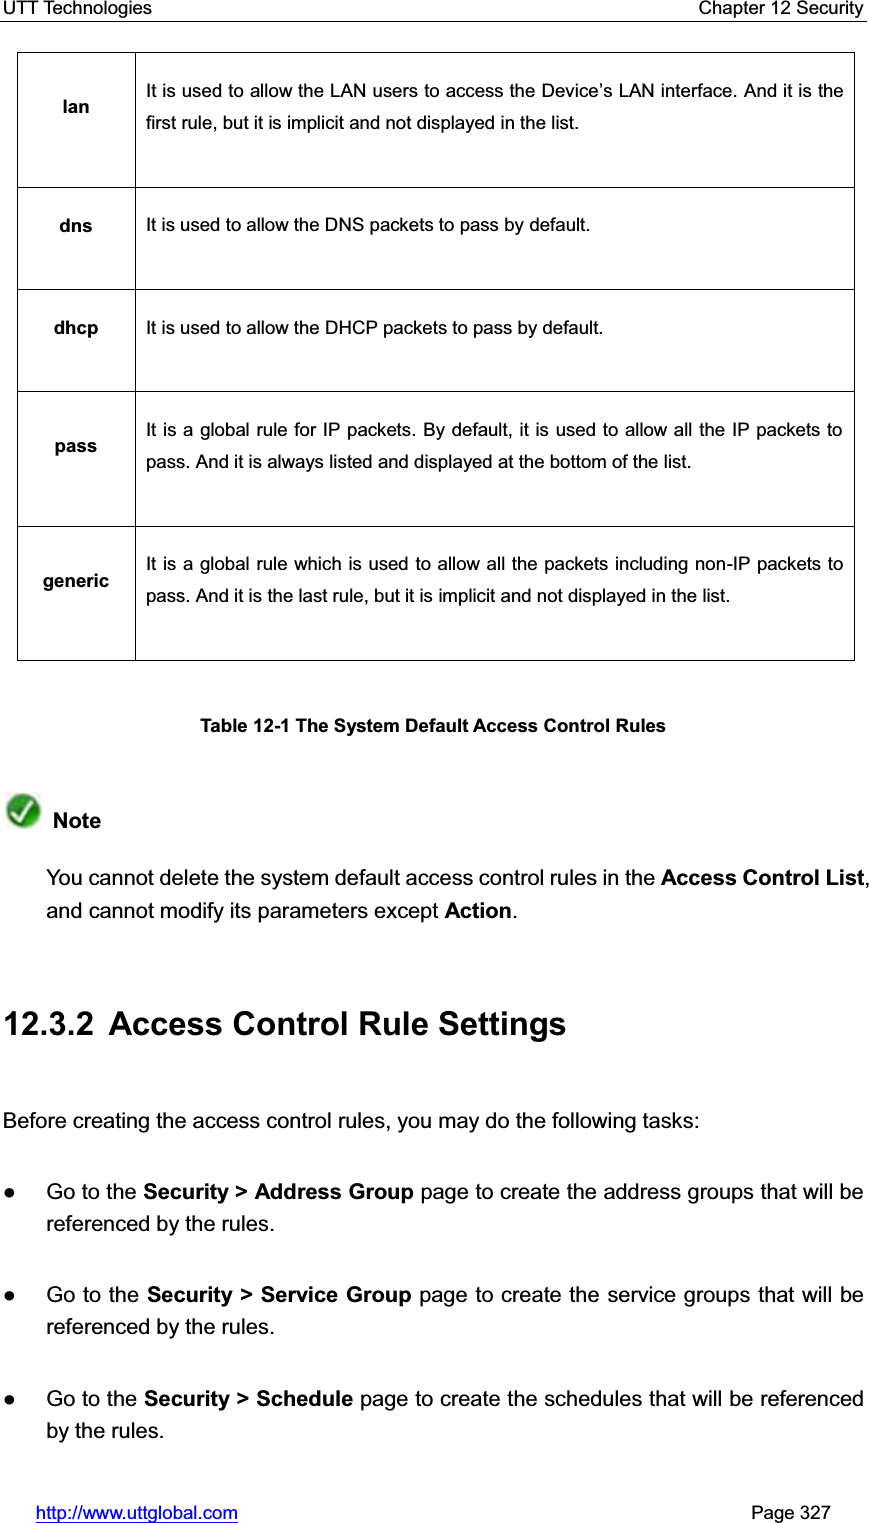 UTT Technologies    Chapter 12 Security   http://www.uttglobal.com                                                       Page 327 lan  It is used to allow the LAN users to access the Device¶s LAN interface. And it is the first rule, but it is implicit and not displayed in the list. dns  It is used to allow the DNS packets to pass by default. dhcp  It is used to allow the DHCP packets to pass by default. pass  It is a global rule for IP packets. By default, it is used to allow all the IP packets to pass. And it is always listed and displayed at the bottom of the list.   generic  It is a global rule which is used to allow all the packets including non-IP packets to pass. And it is the last rule, but it is implicit and not displayed in the list. Table 12-1 The System Default Access Control Rules NoteYou cannot delete the system default access control rules in the Access Control List,and cannot modify its parameters except Action.12.3.2  Access Control Rule Settings Before creating the access control rules, you may do the following tasks: Ɣ Go to the Security &gt; Address Group page to create the address groups that will be referenced by the rules.   Ɣ Go to the Security &gt; Service Group page to create the service groups that will be referenced by the rules.   Ɣ Go to the Security &gt; Schedule page to create the schedules that will be referenced by the rules. 